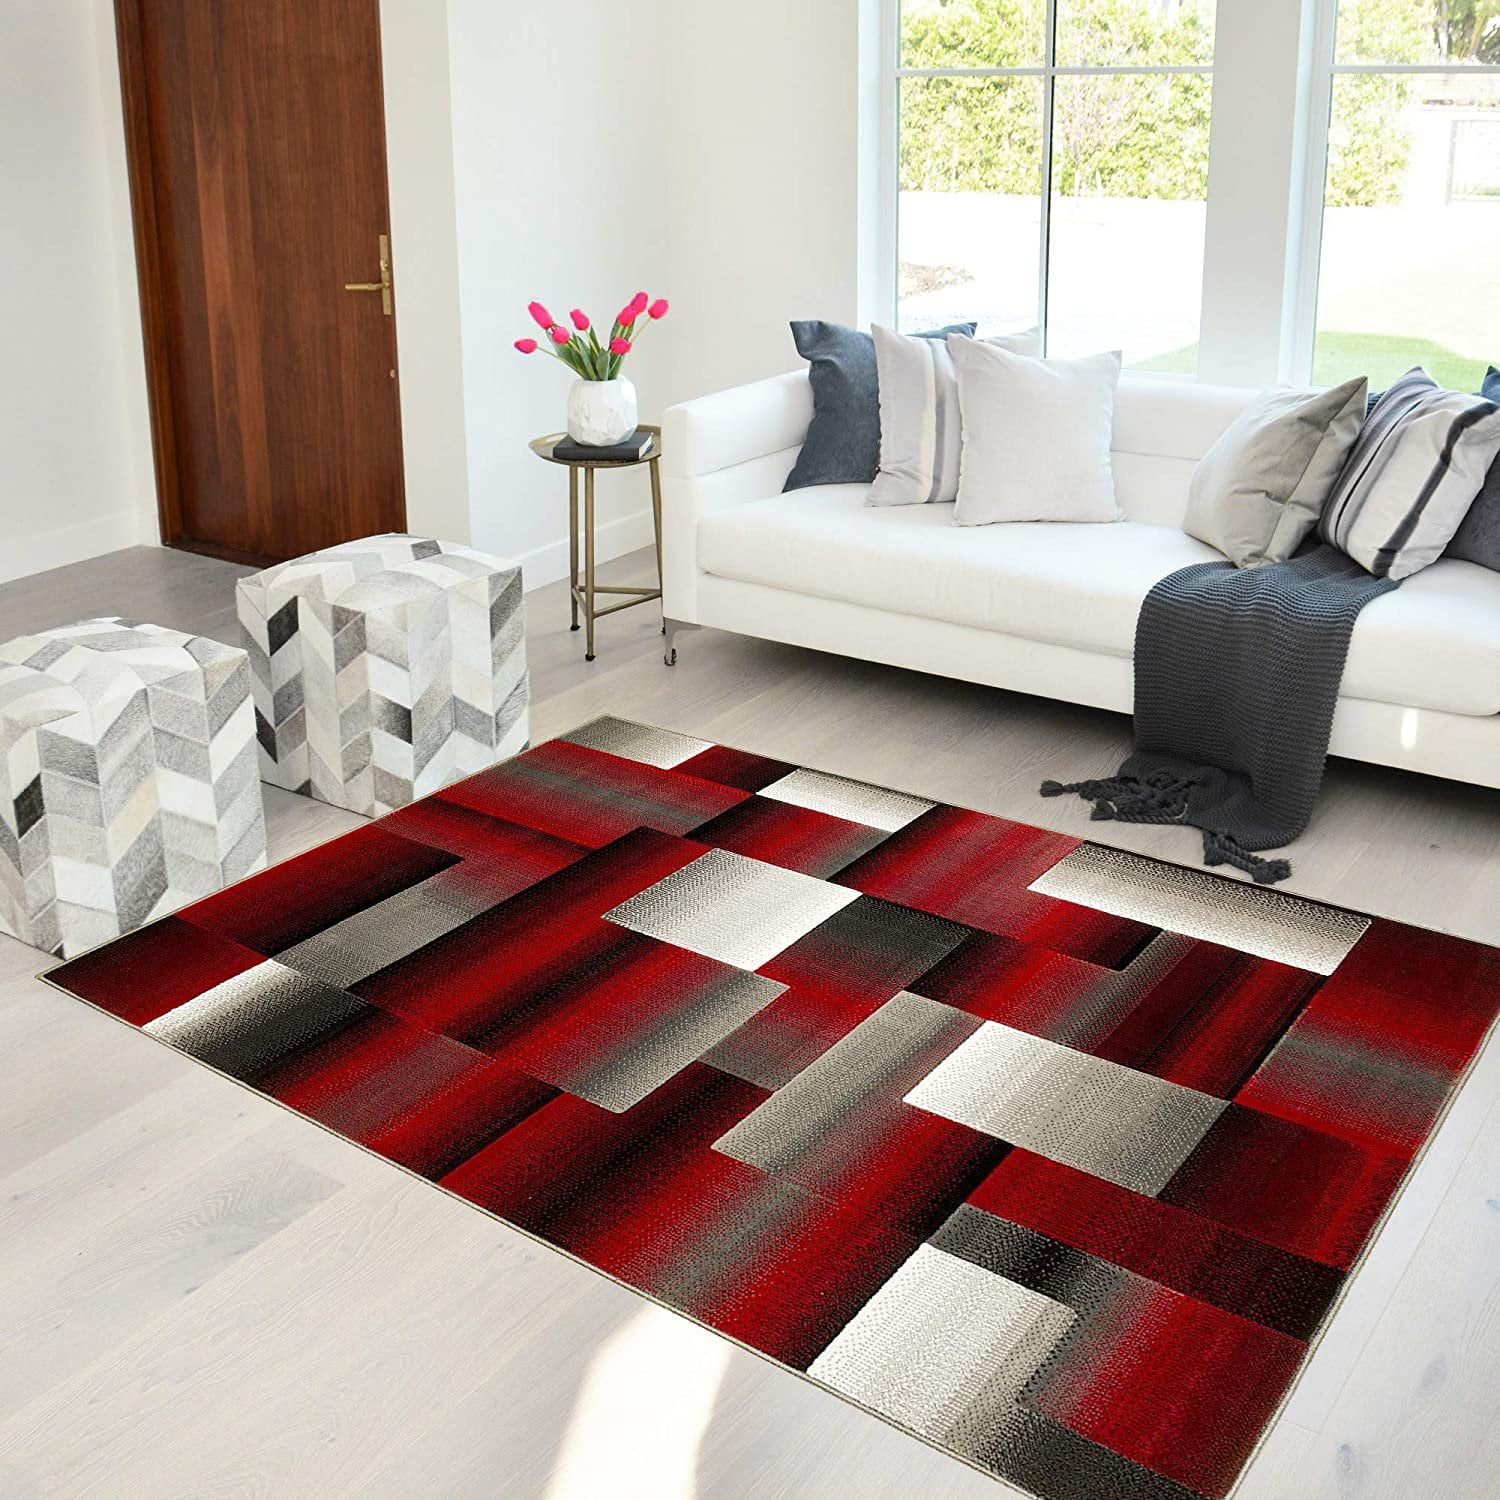 Modern Geometric Red Area Rug 2x8 Contemporary Runner Approx 1' 10" x 7' 3" 